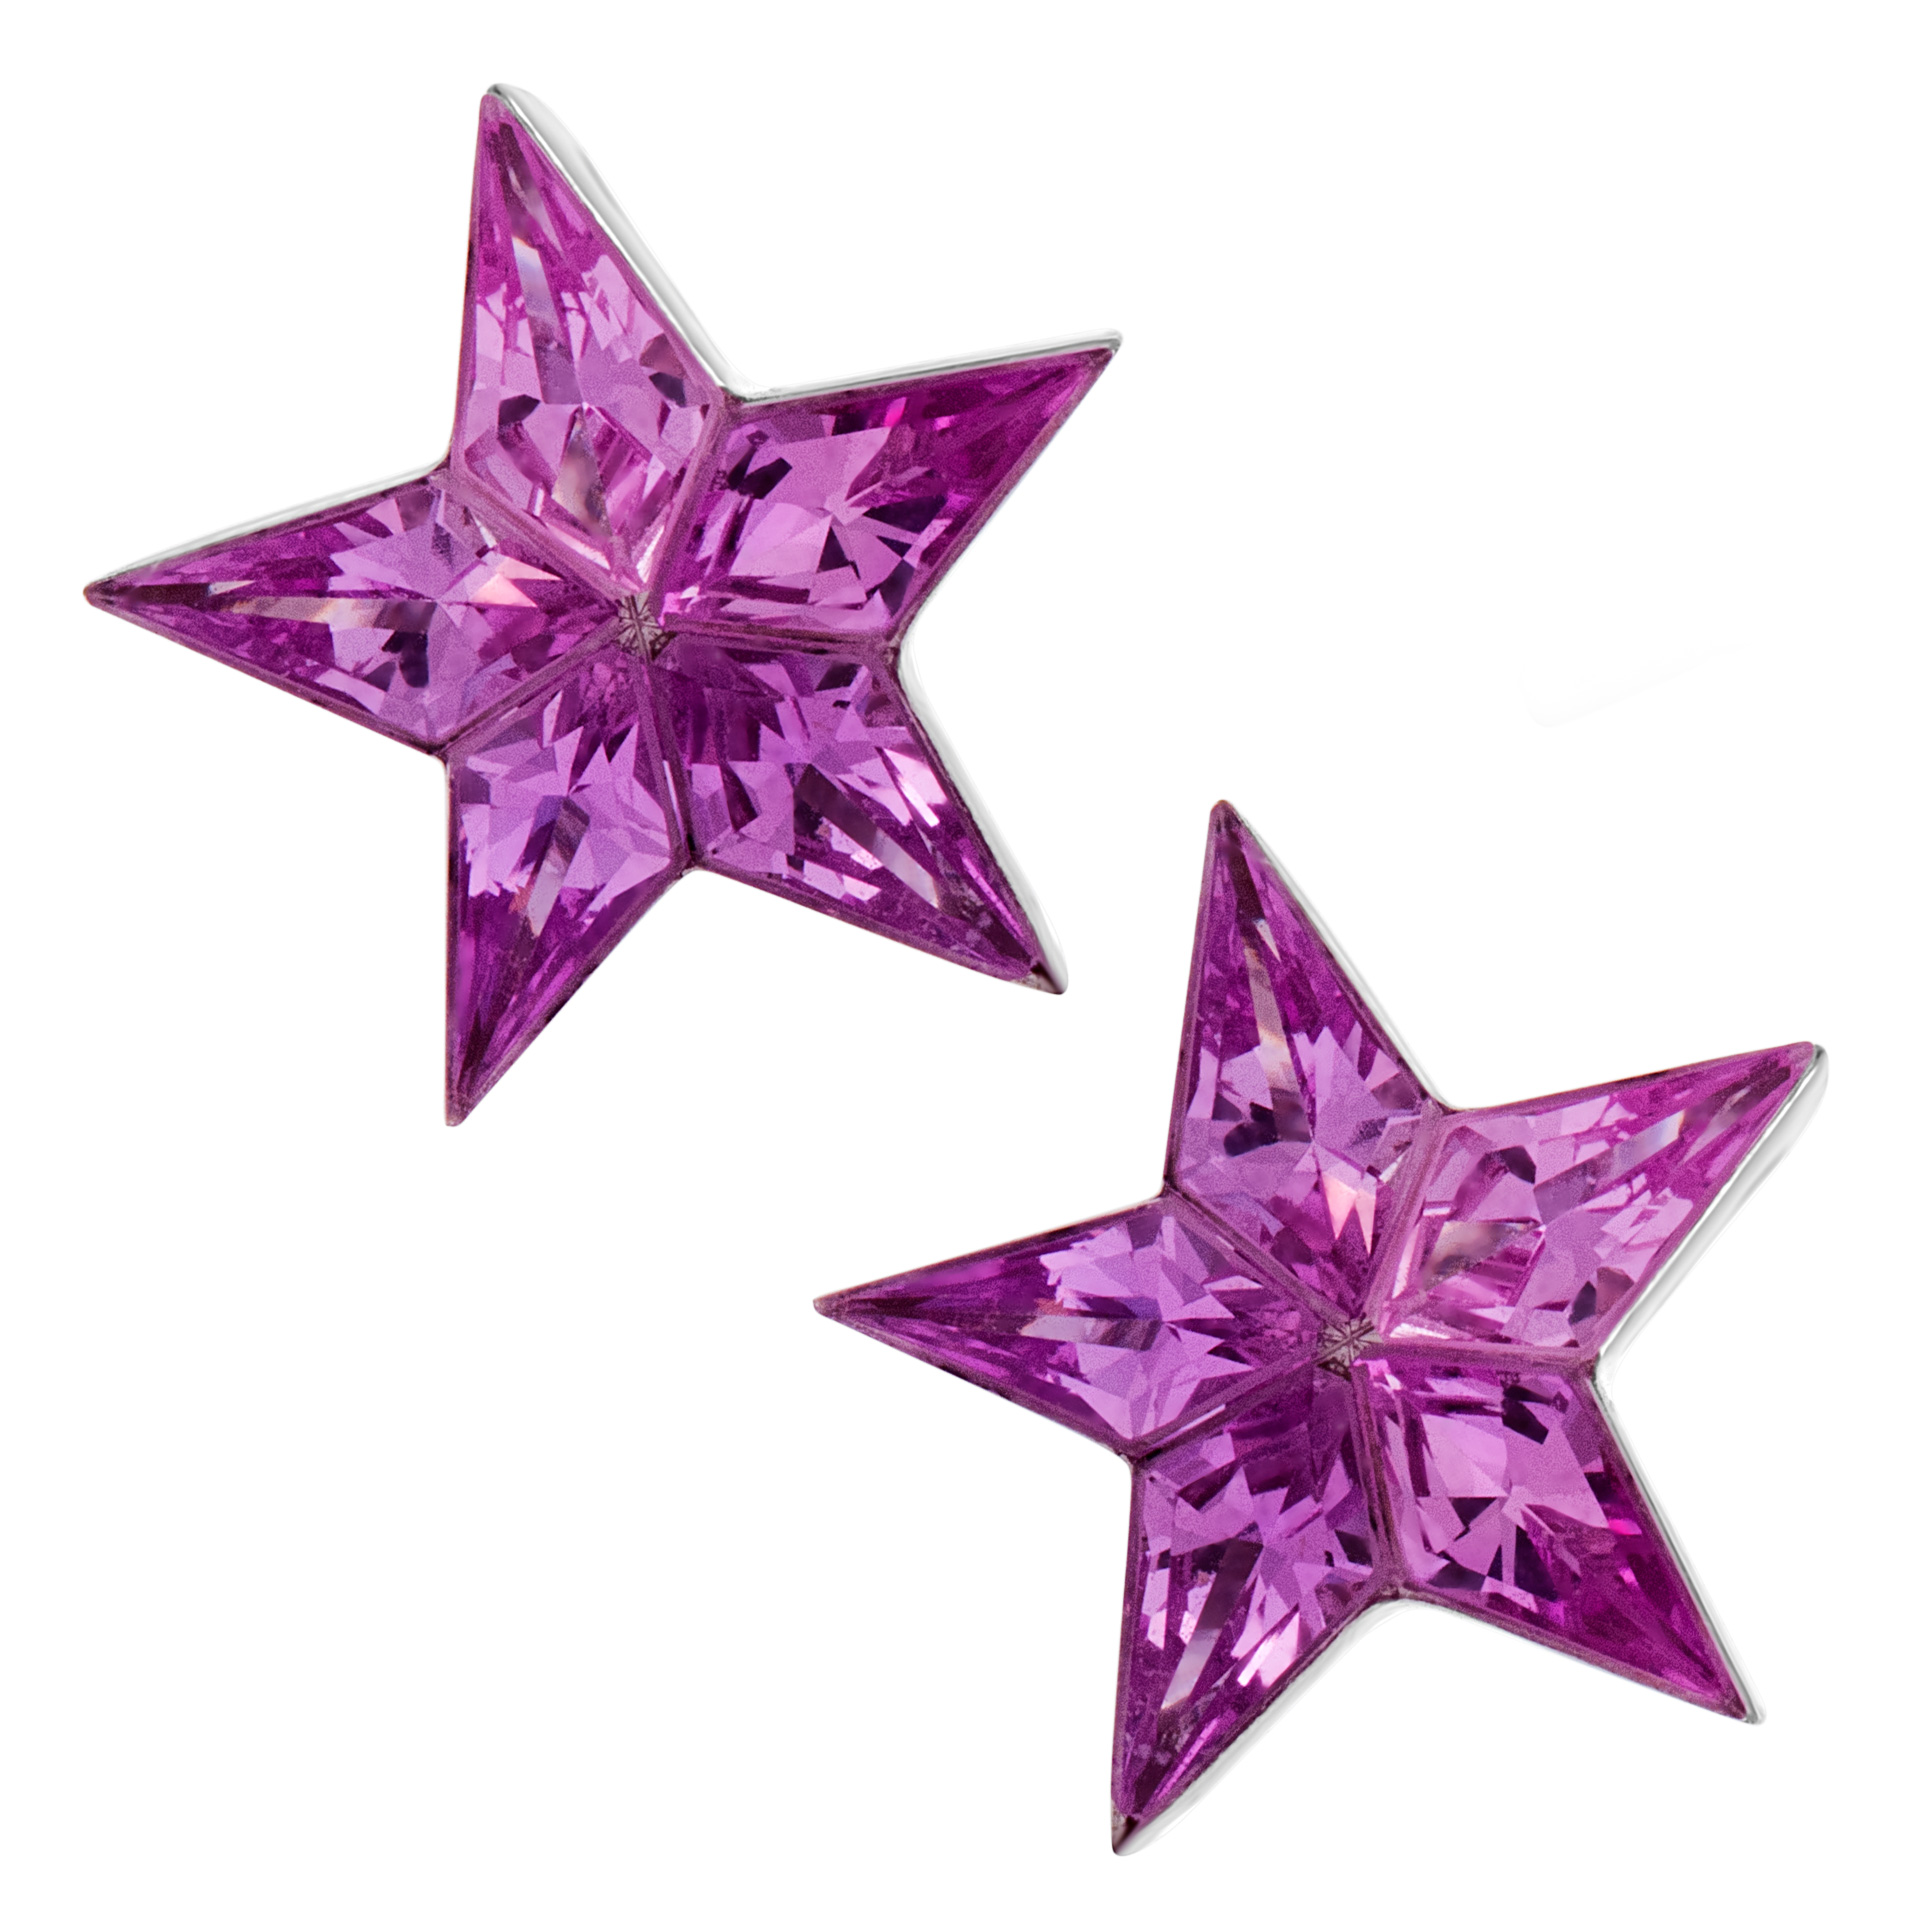 Star pink sapphire earrings in 18k white gold. 2.50 carats in fancy cut sapphires image 1